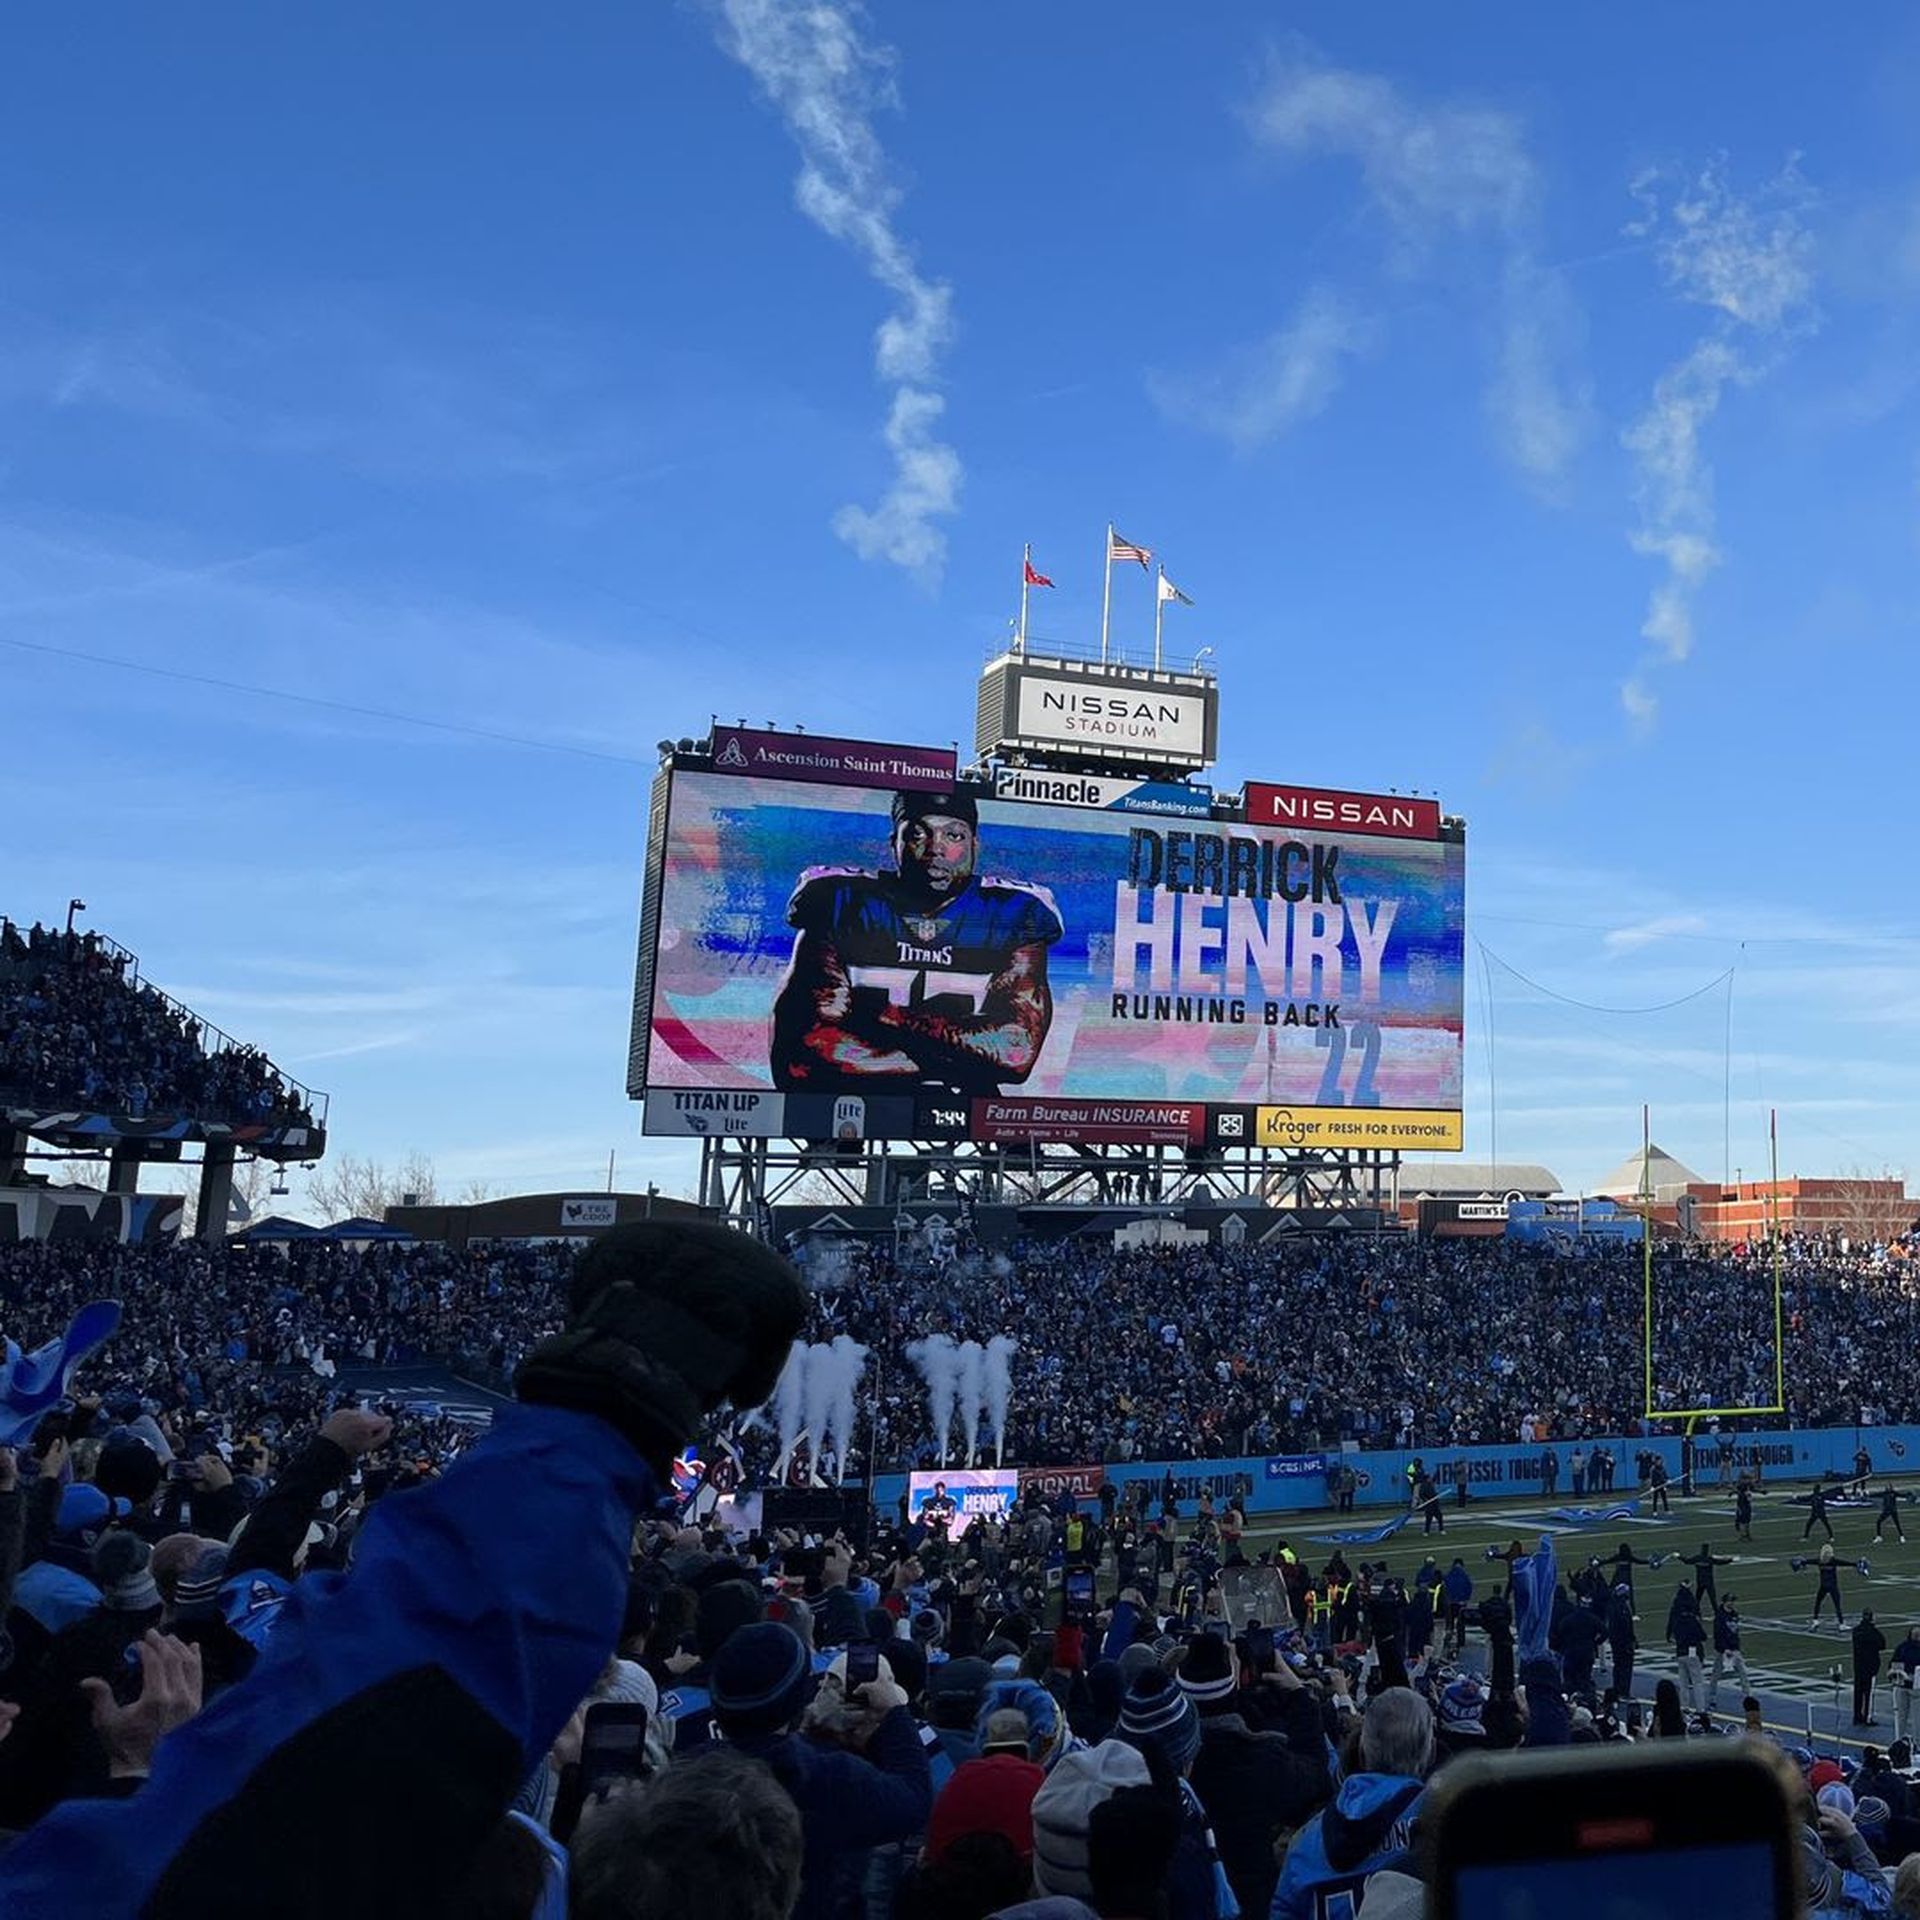 Derrick "King" Henry gets his long awaited pregame introduction Saturday